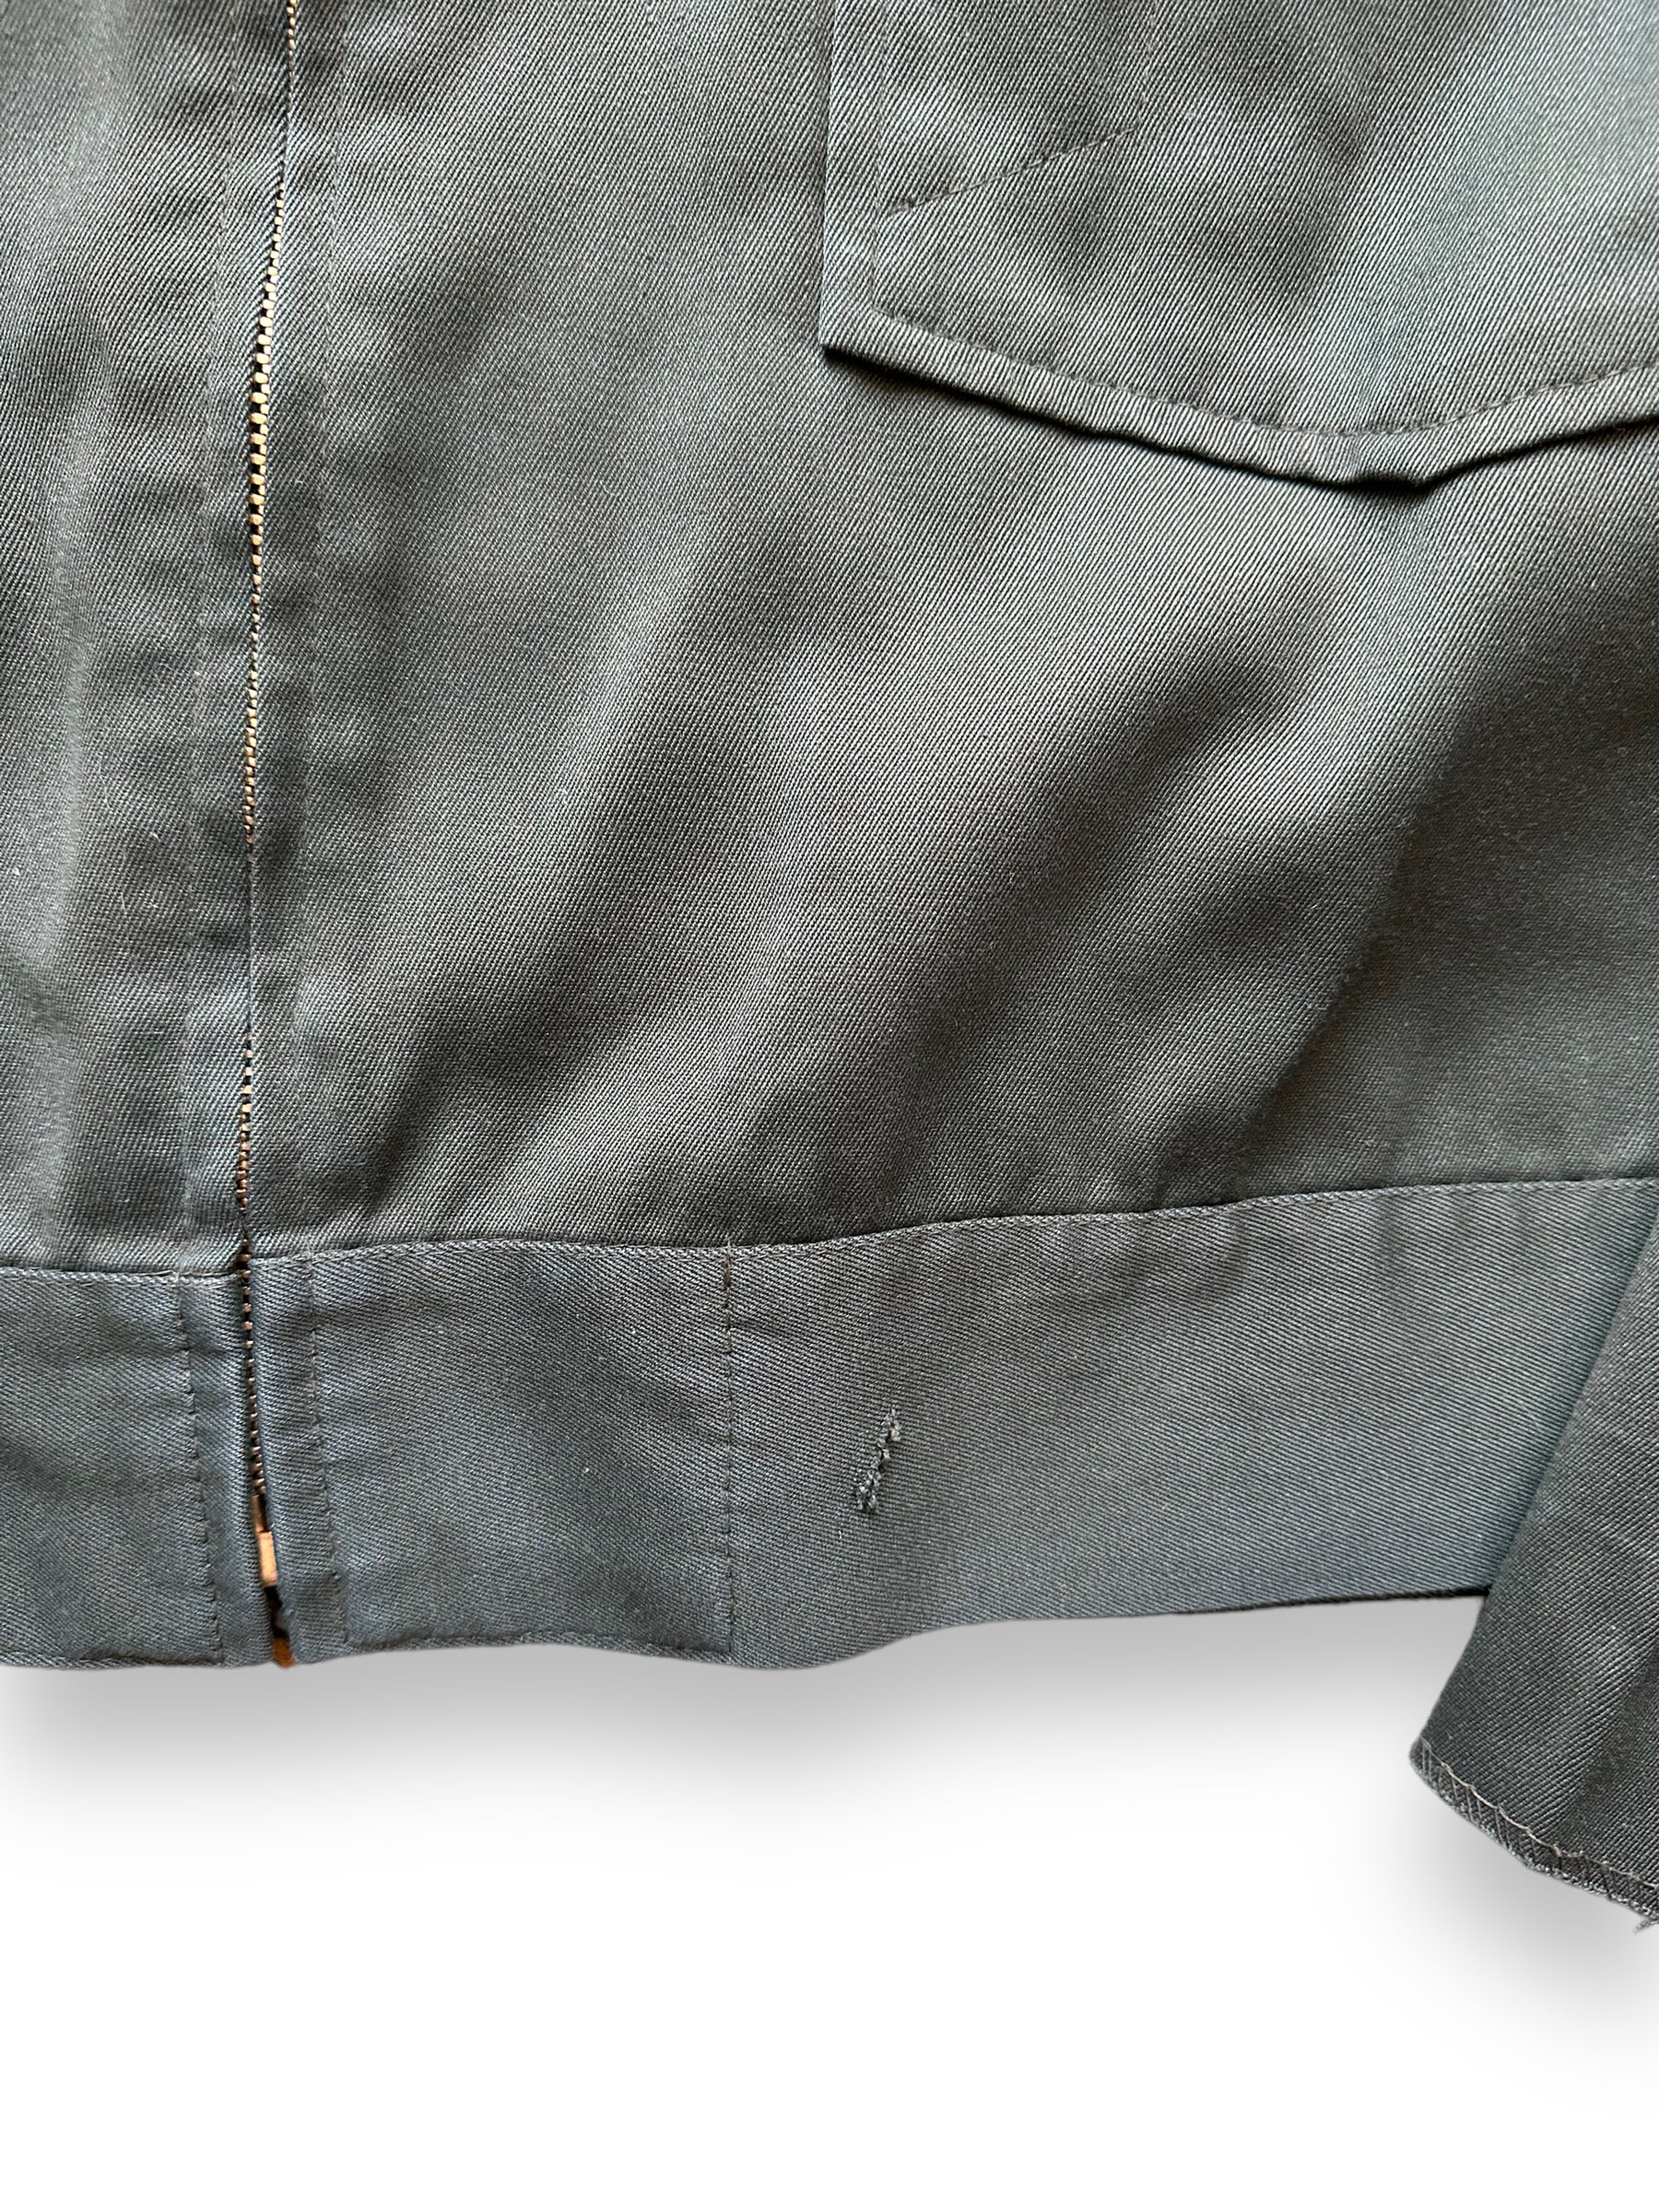 Small Scuff on Waistband of Vintage Day's Gas Station Jacket SZ 48 | Vintage Workwear Jacket Seattle | Seattle Vintage Clothing